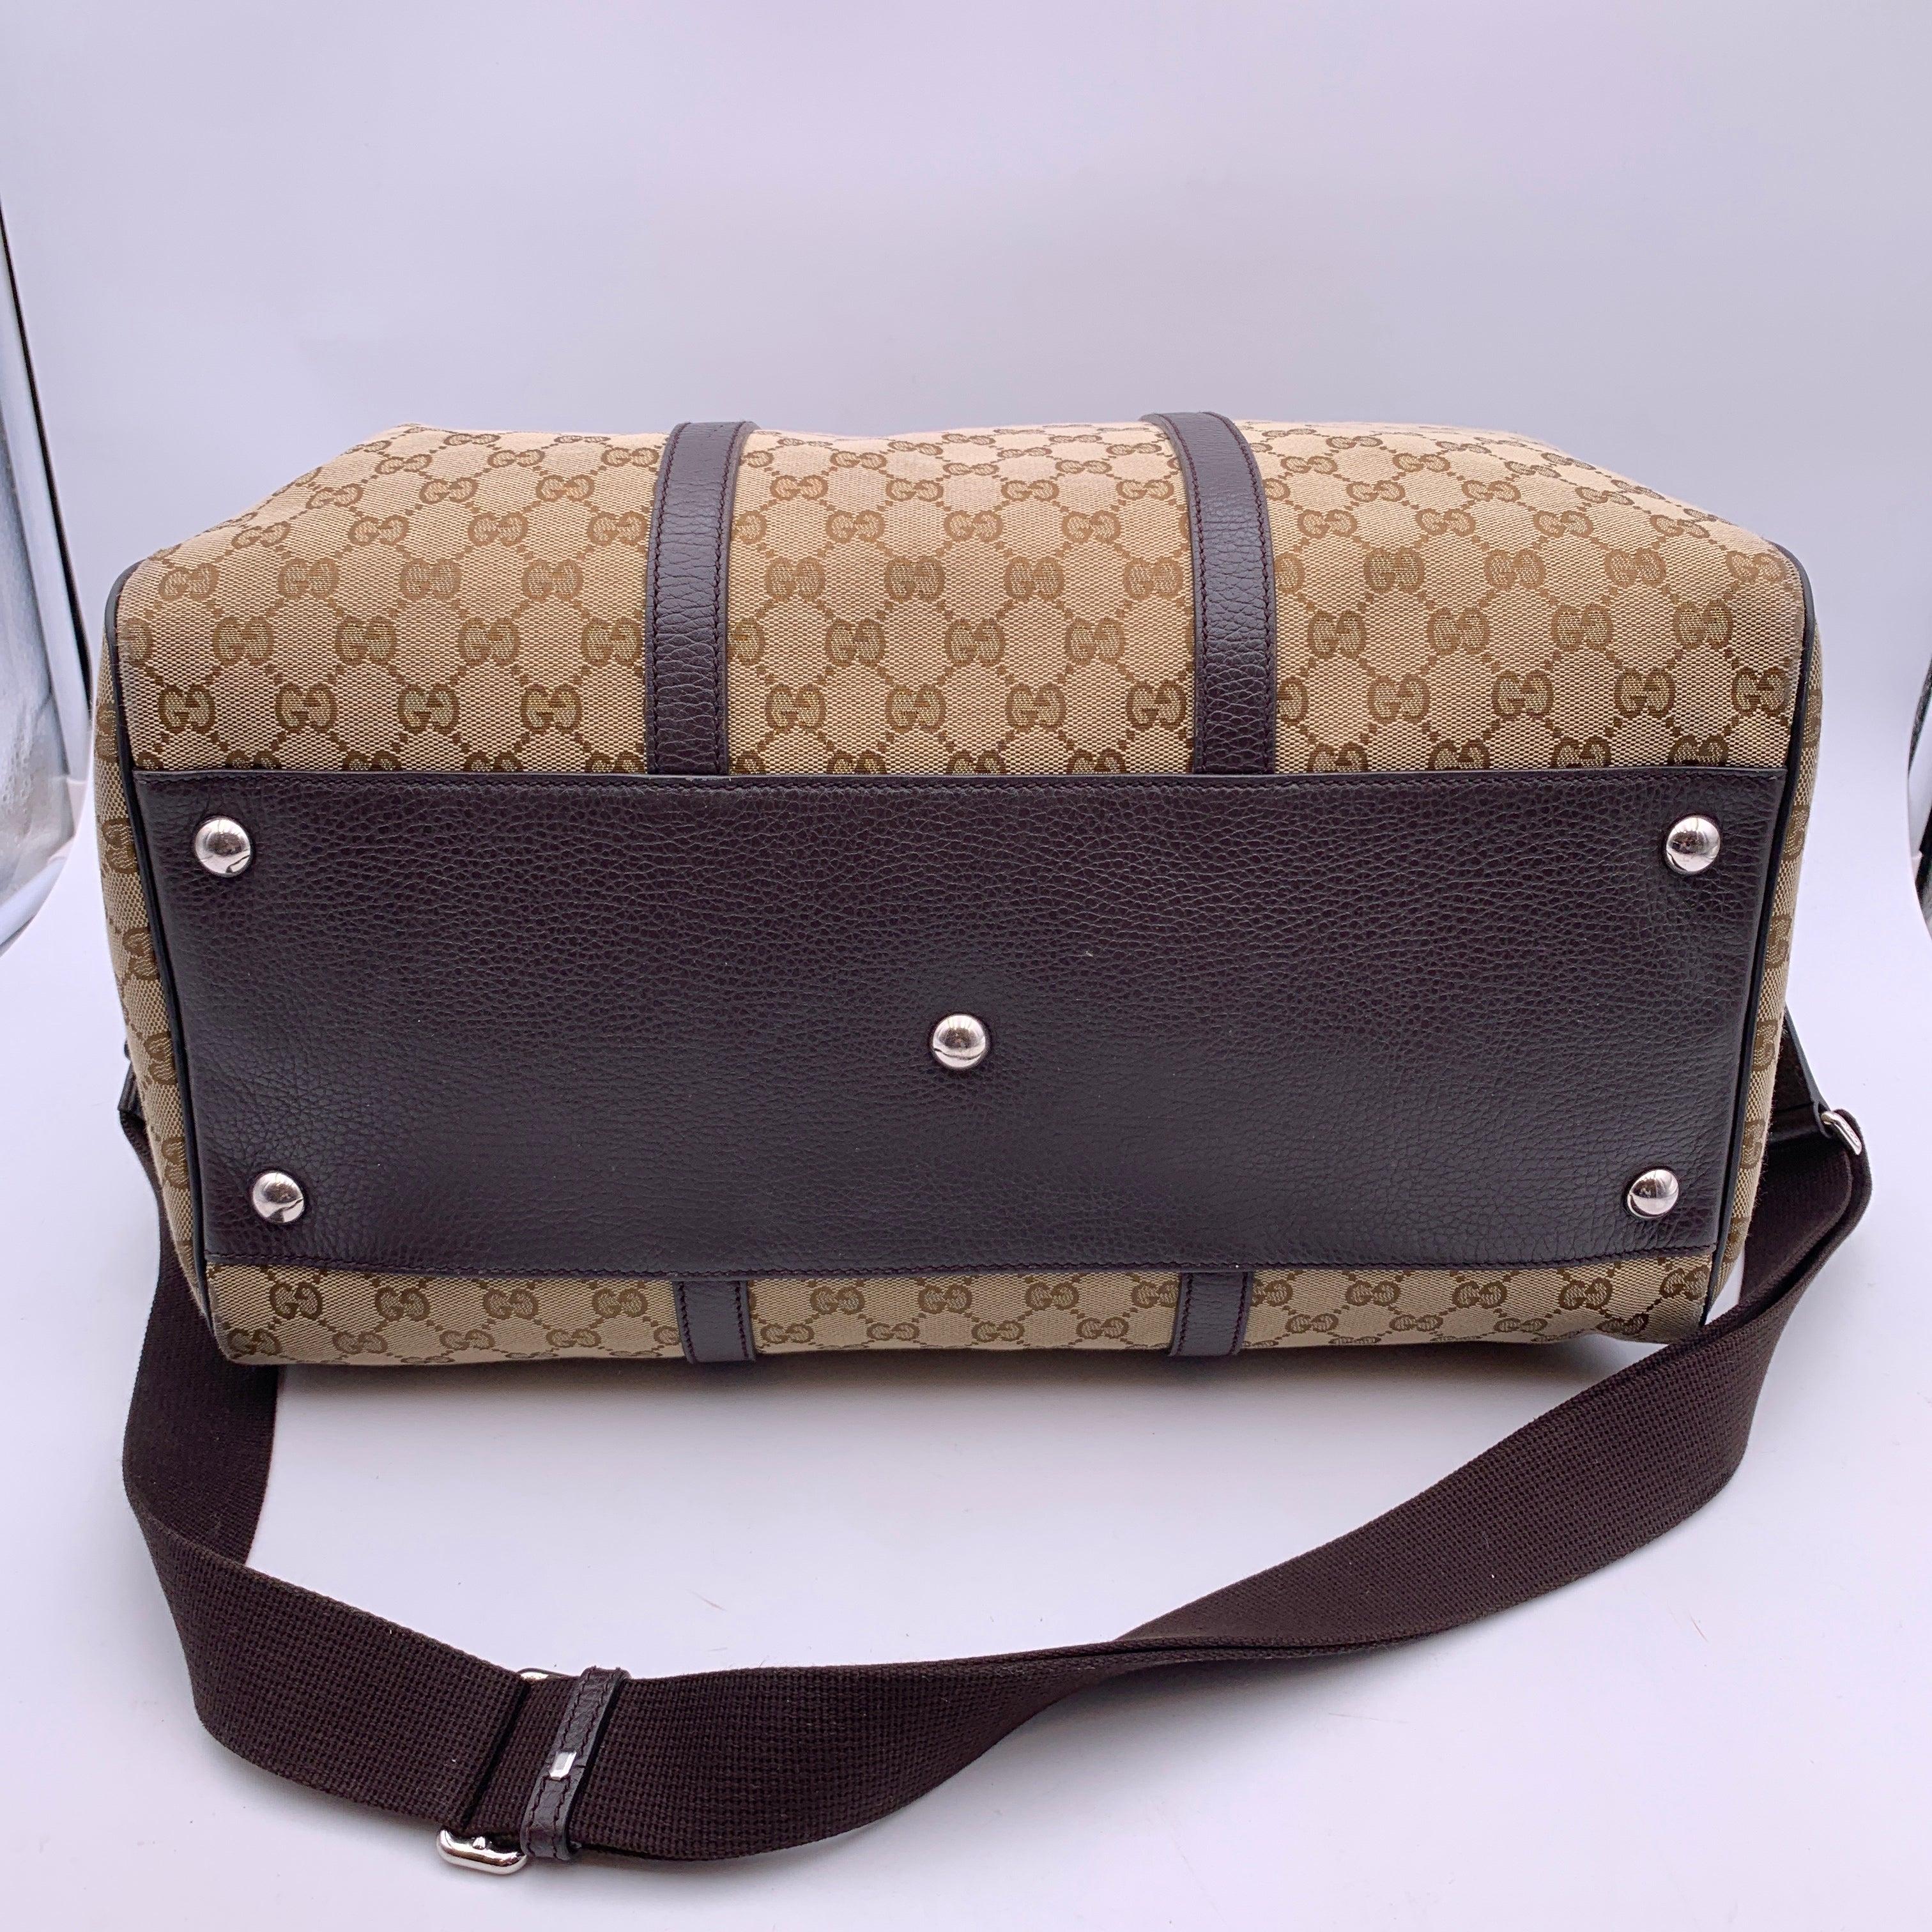 Gucci Beige Monogram Canvas Duffle Weekender Travel Bag with Strap For Sale 1